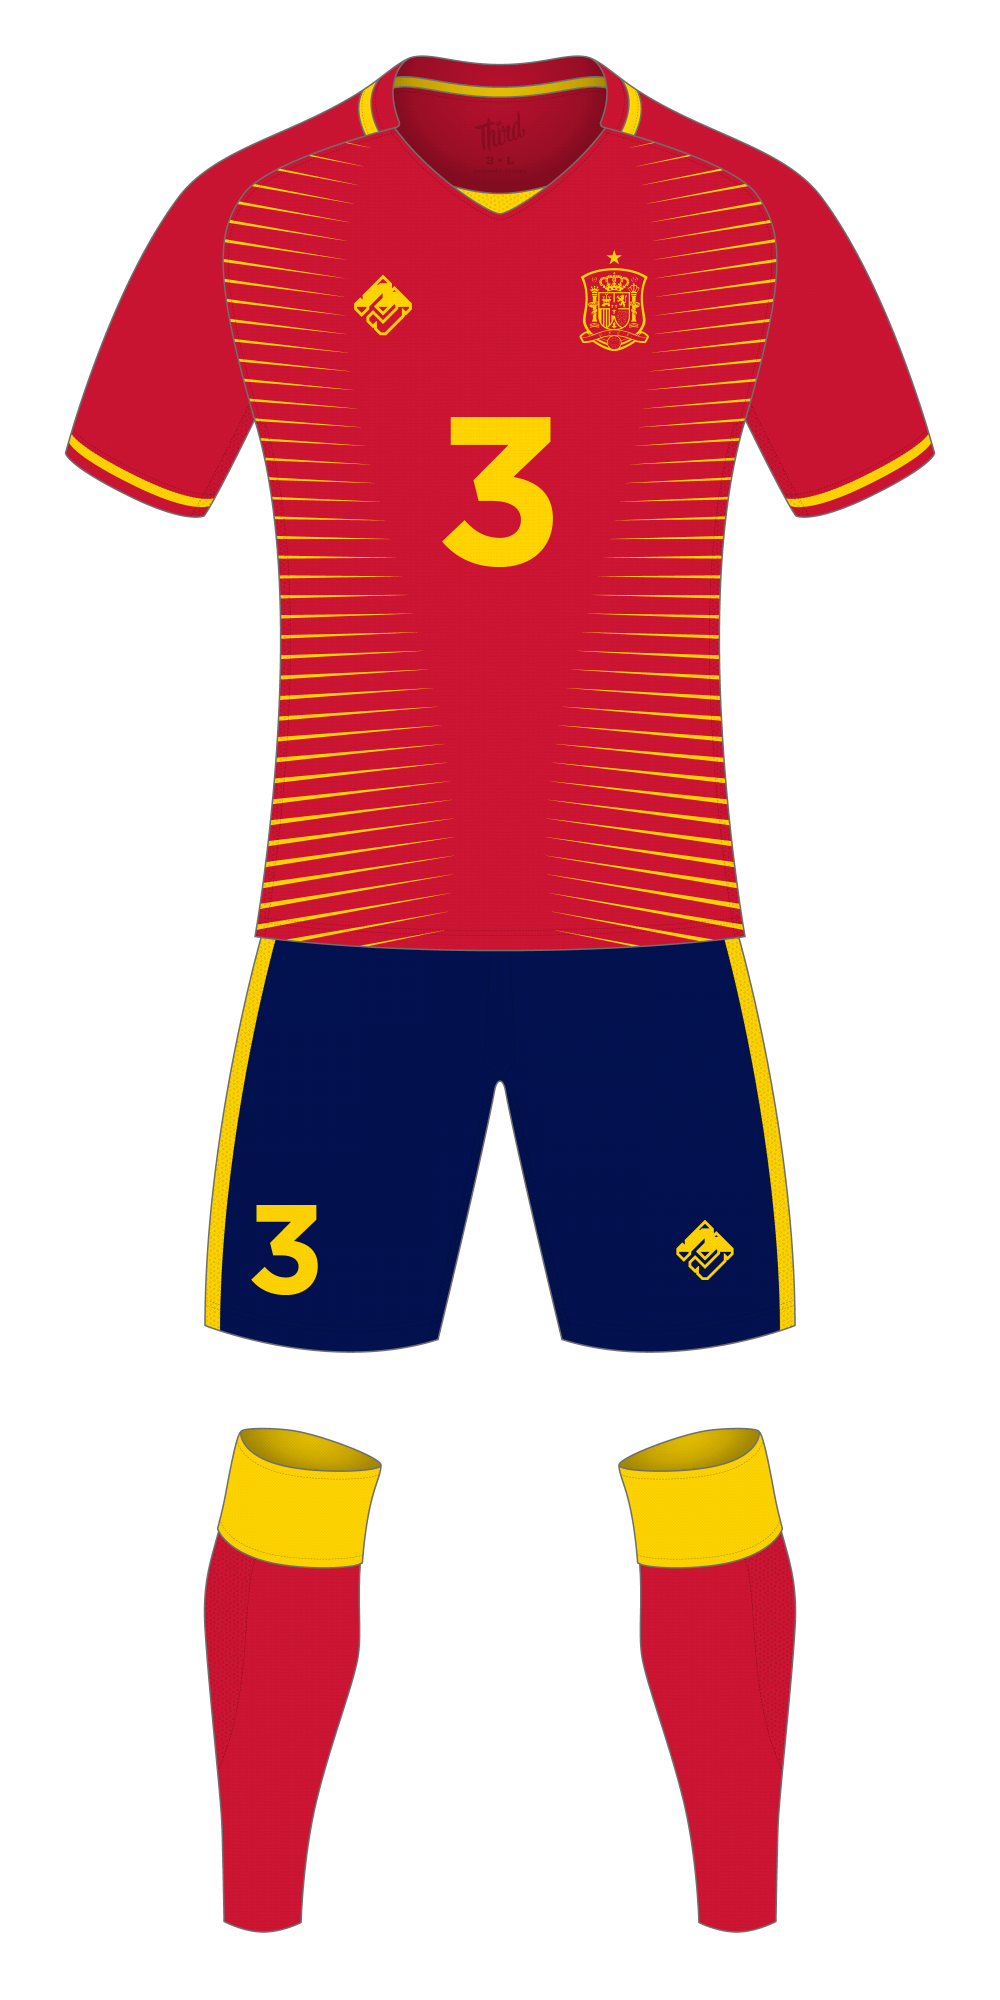 Spain World Cup 2018 concept